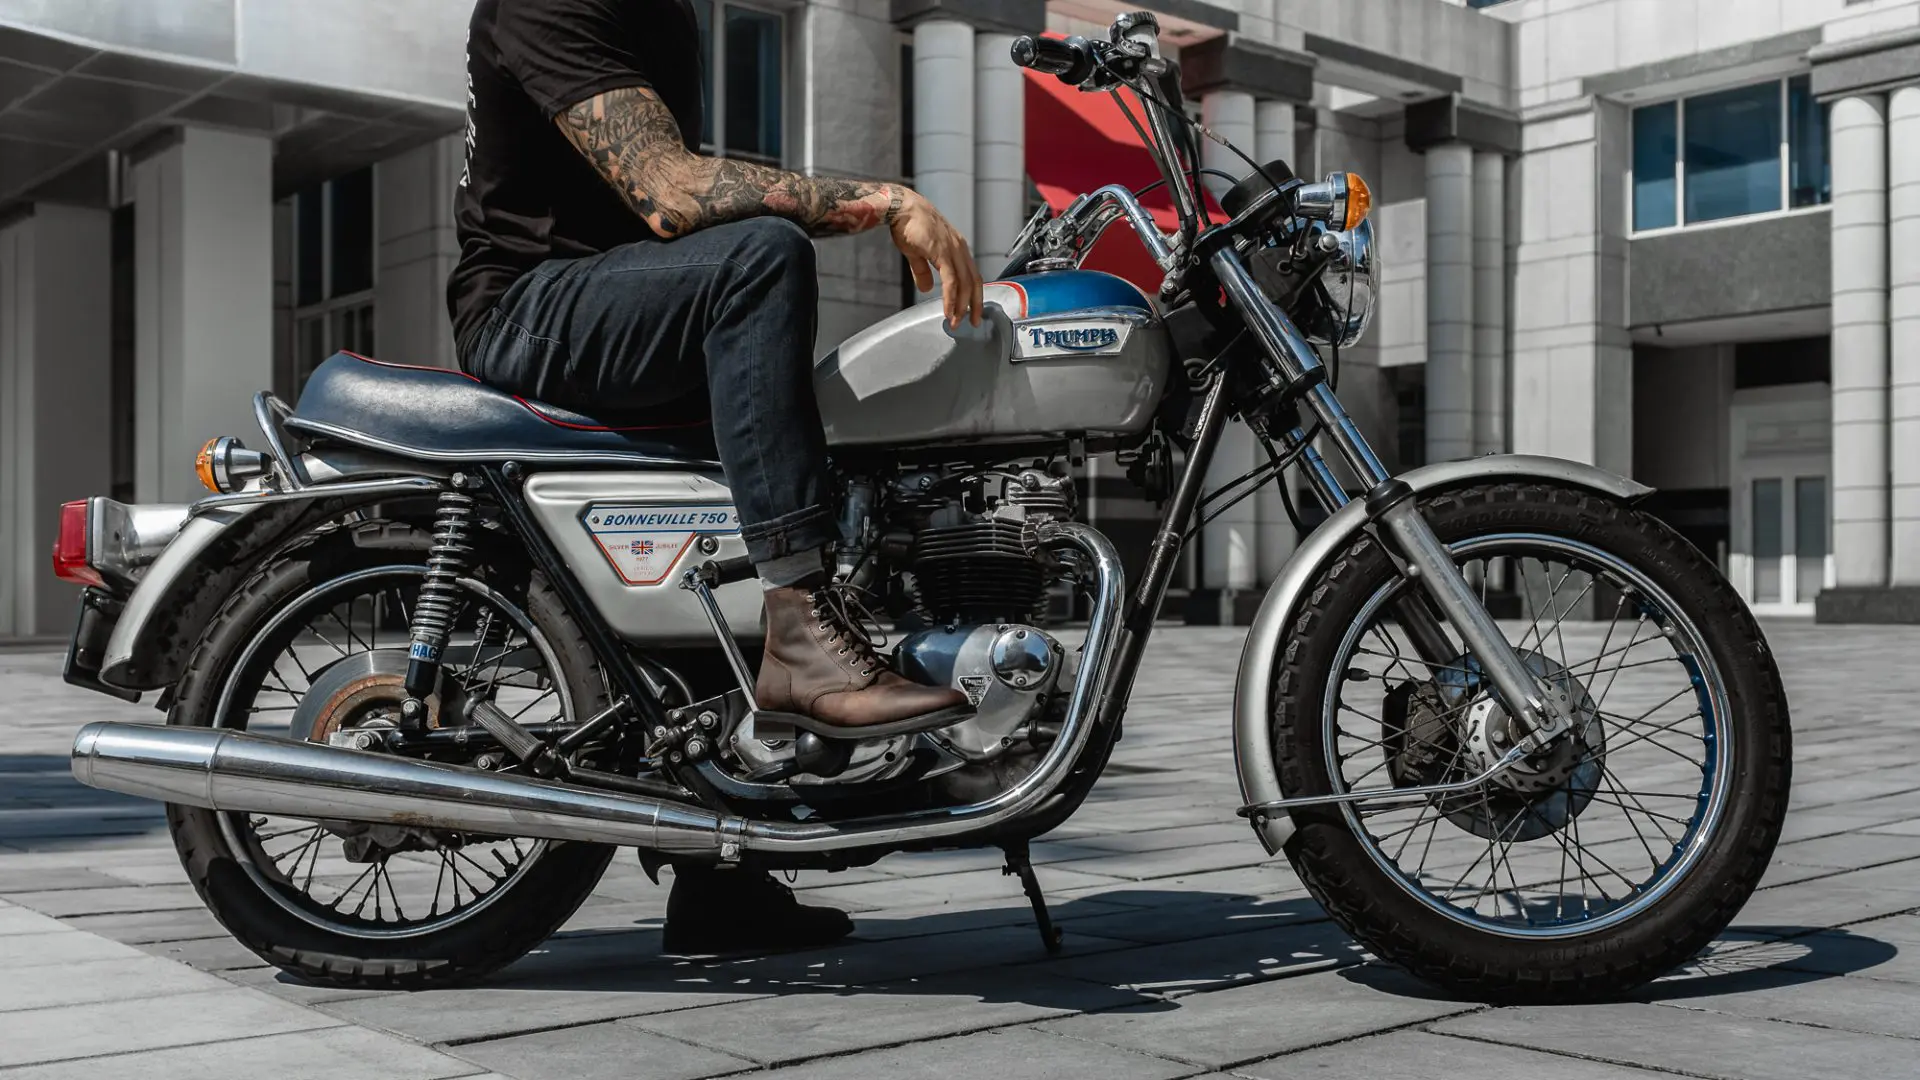 Triumph Motorcycles History: Rise, Fall & Revival of an Icon